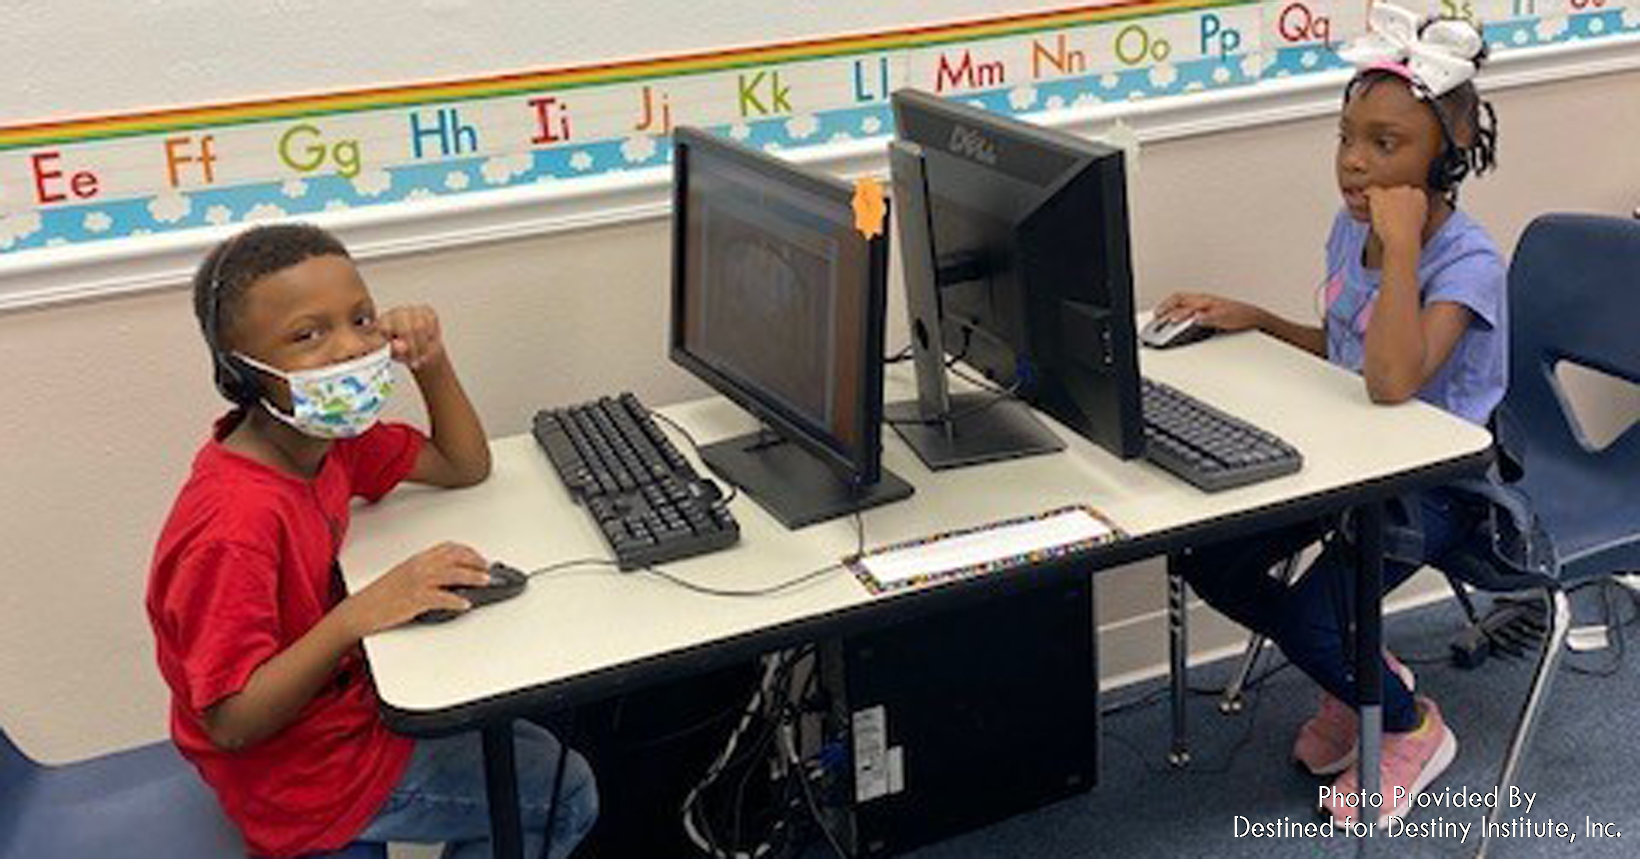 These two young students are having one of their computer sessions where they learn new things every day.